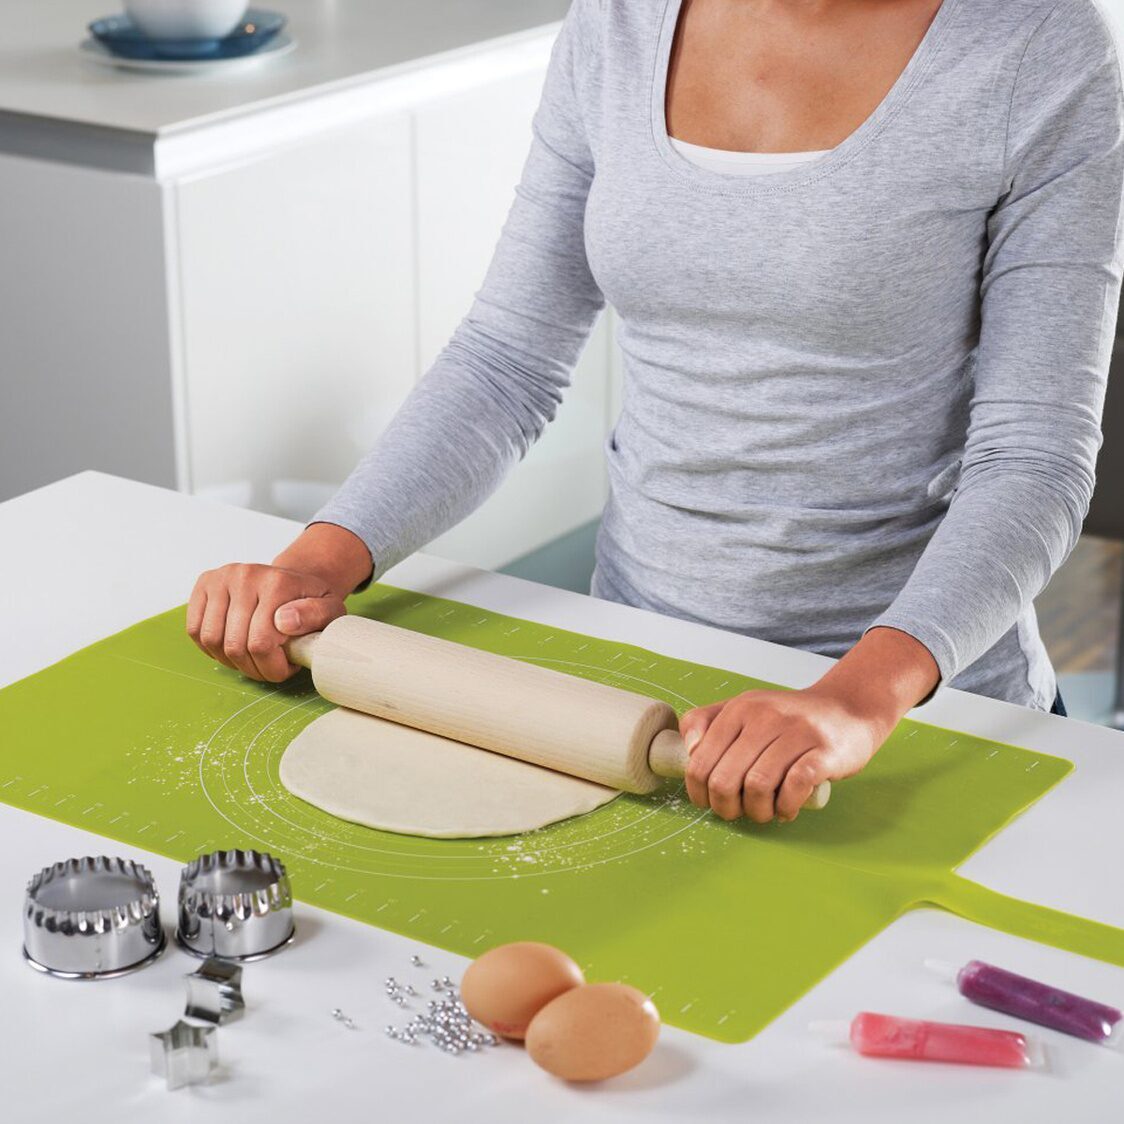  Joseph Joseph Adjustable Rolling Pin with Removable